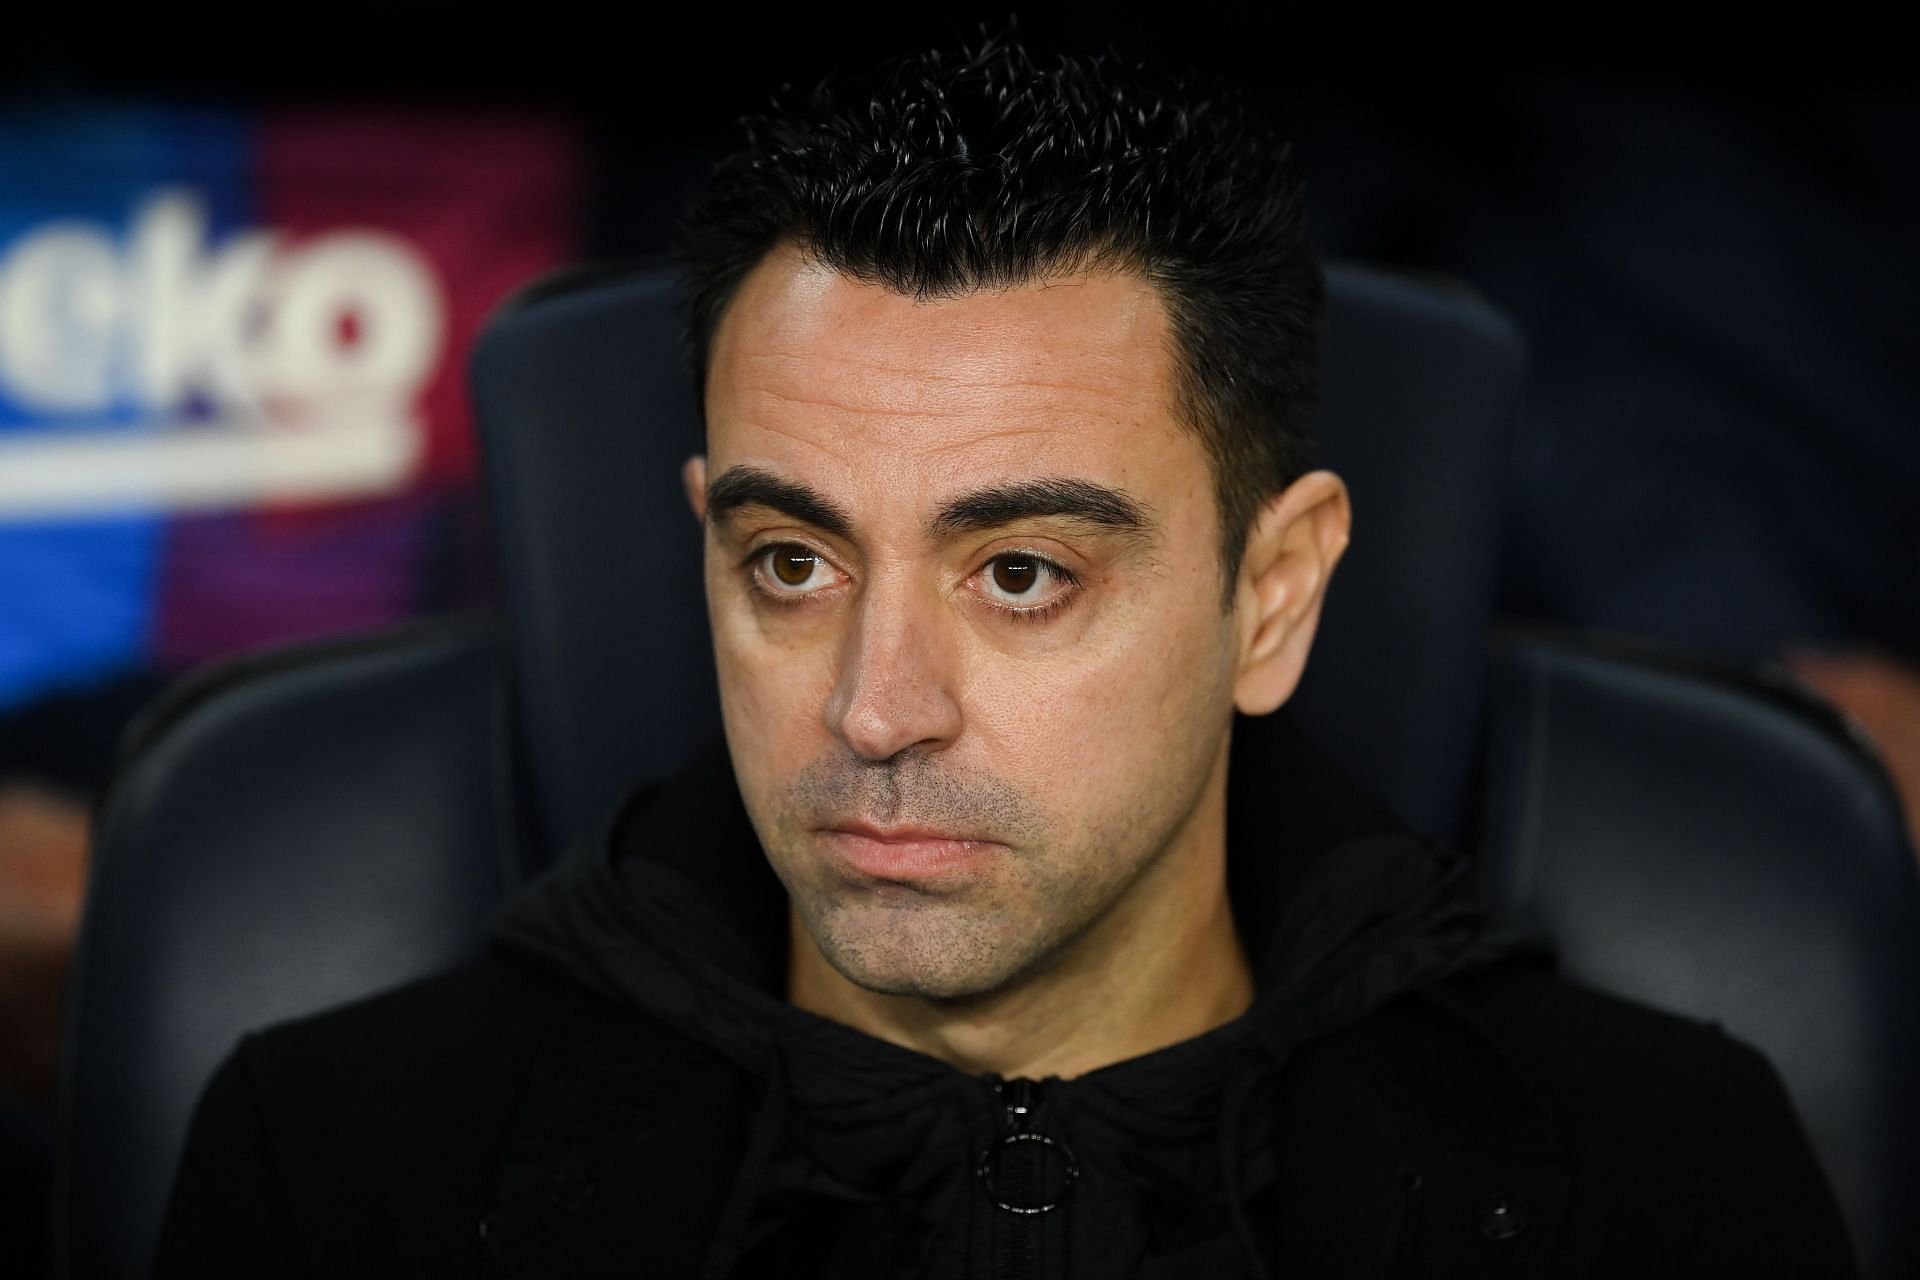 Barcelona reportedly need to offload players before making new signings.